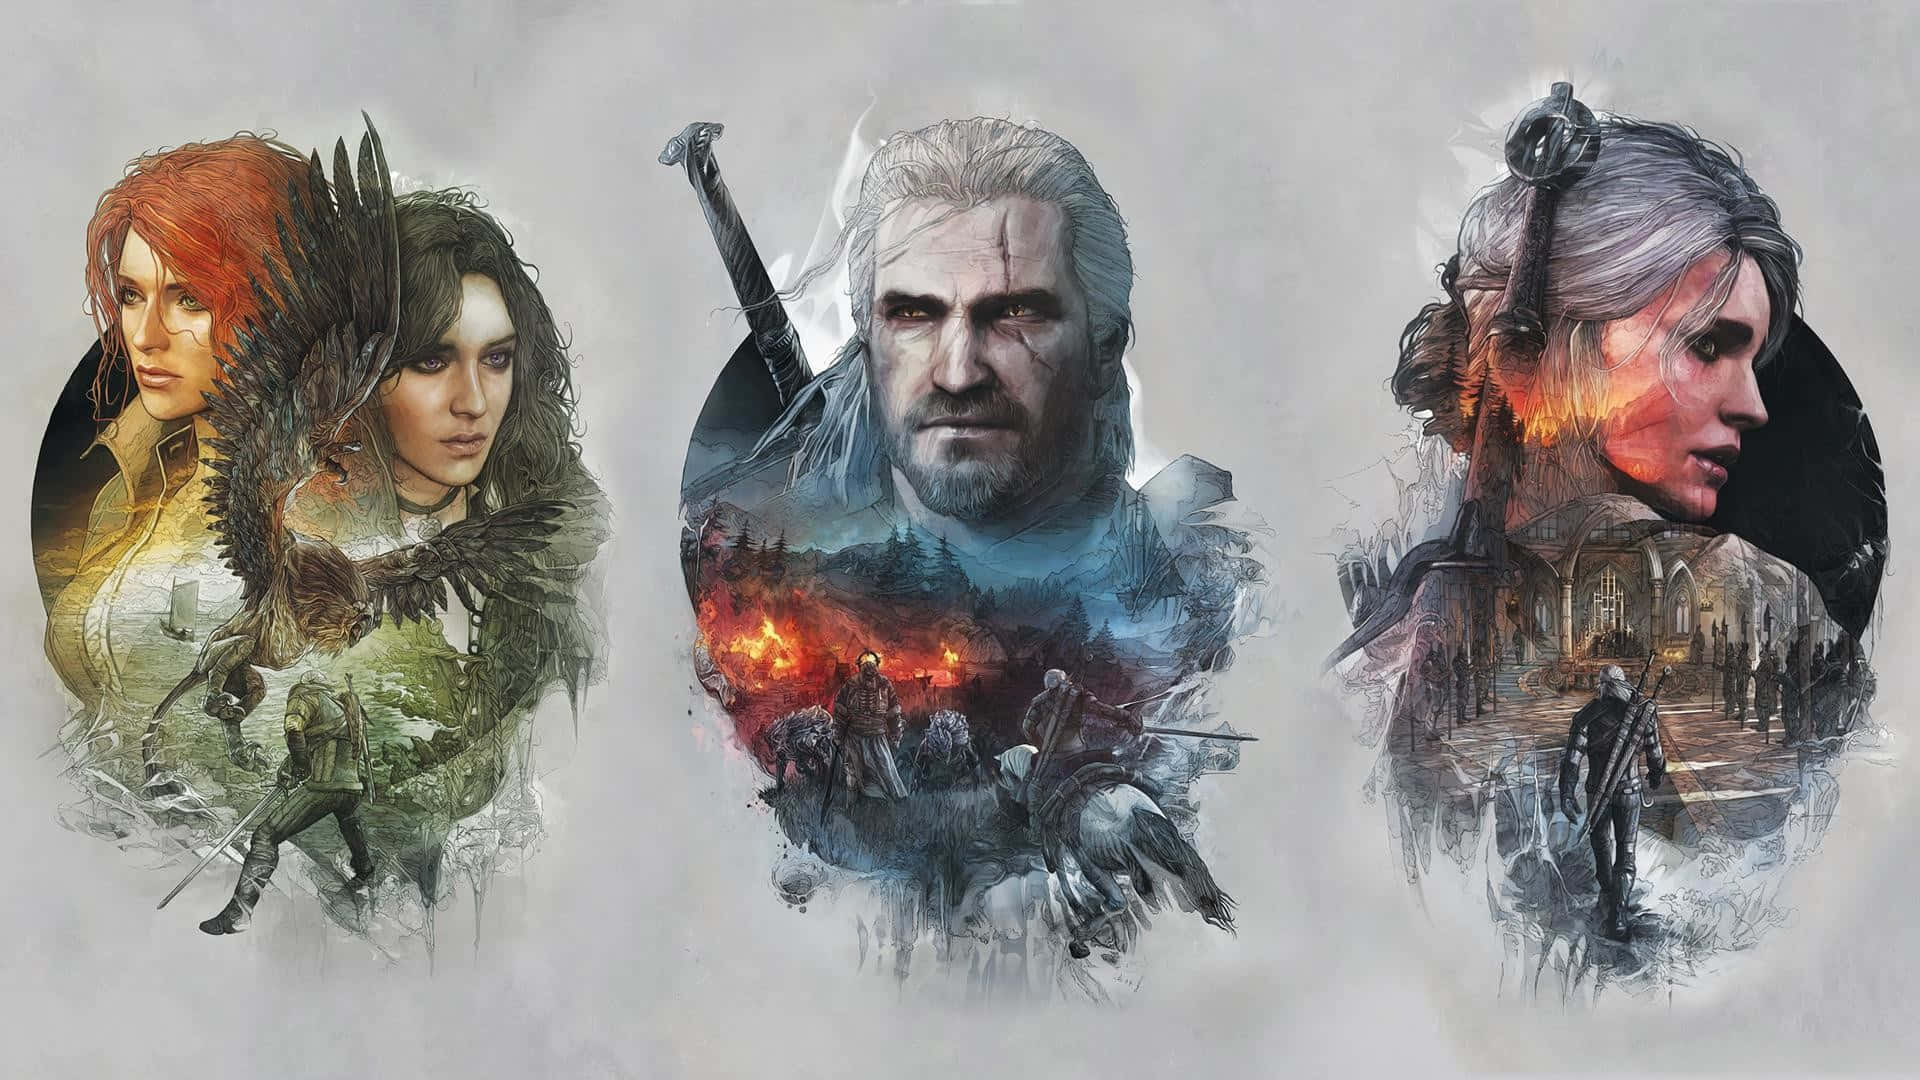 Take on daring quests in the massive world of The Witcher 3